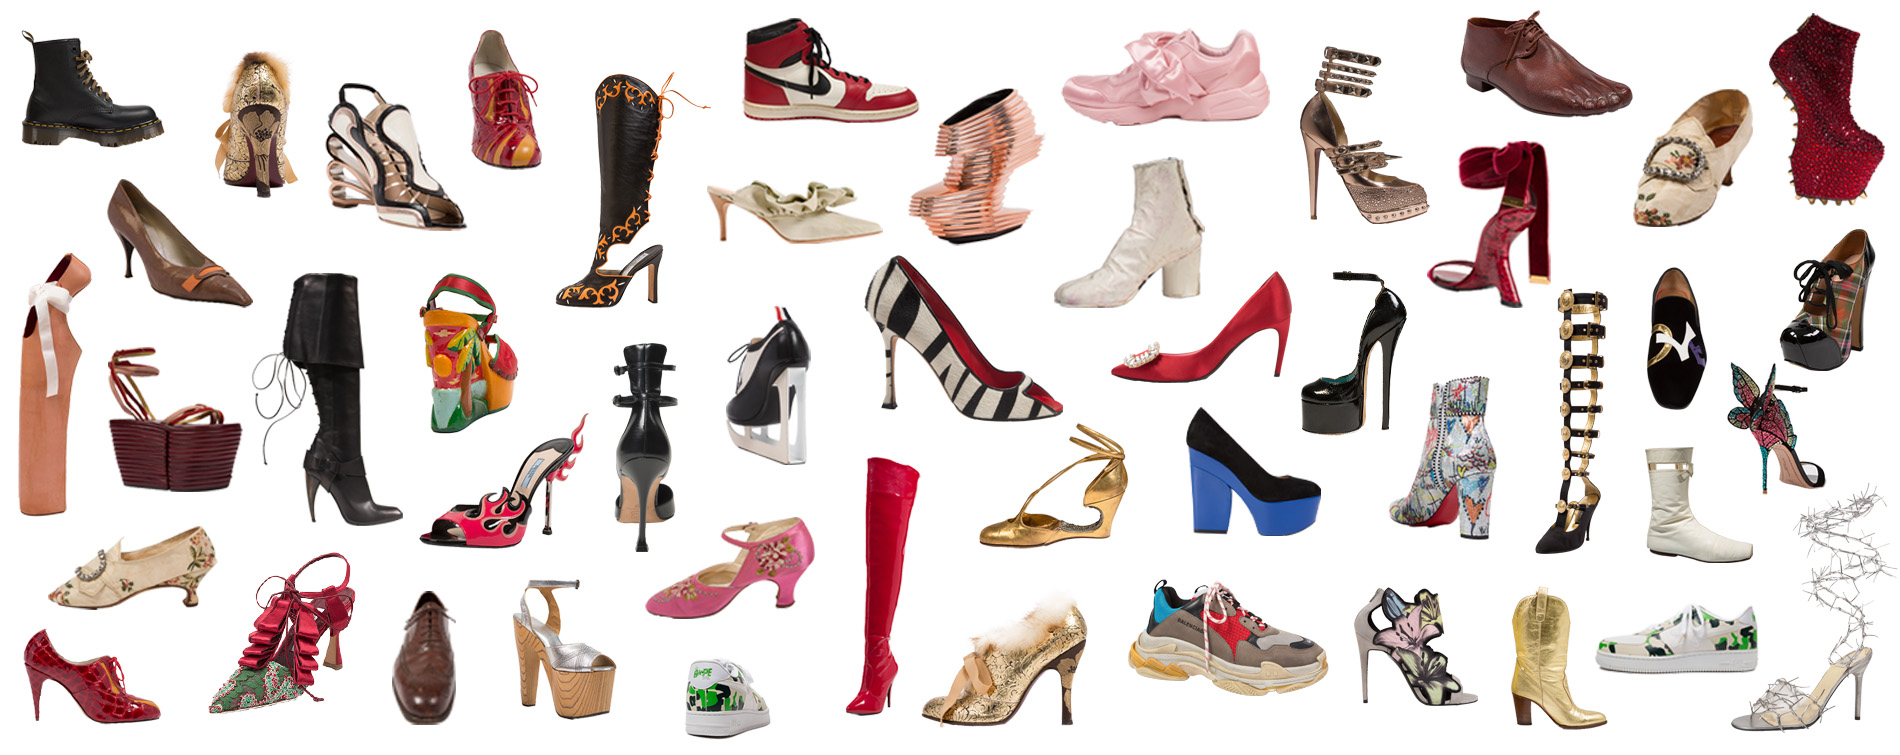 a collage of shoes featured in the exhibition